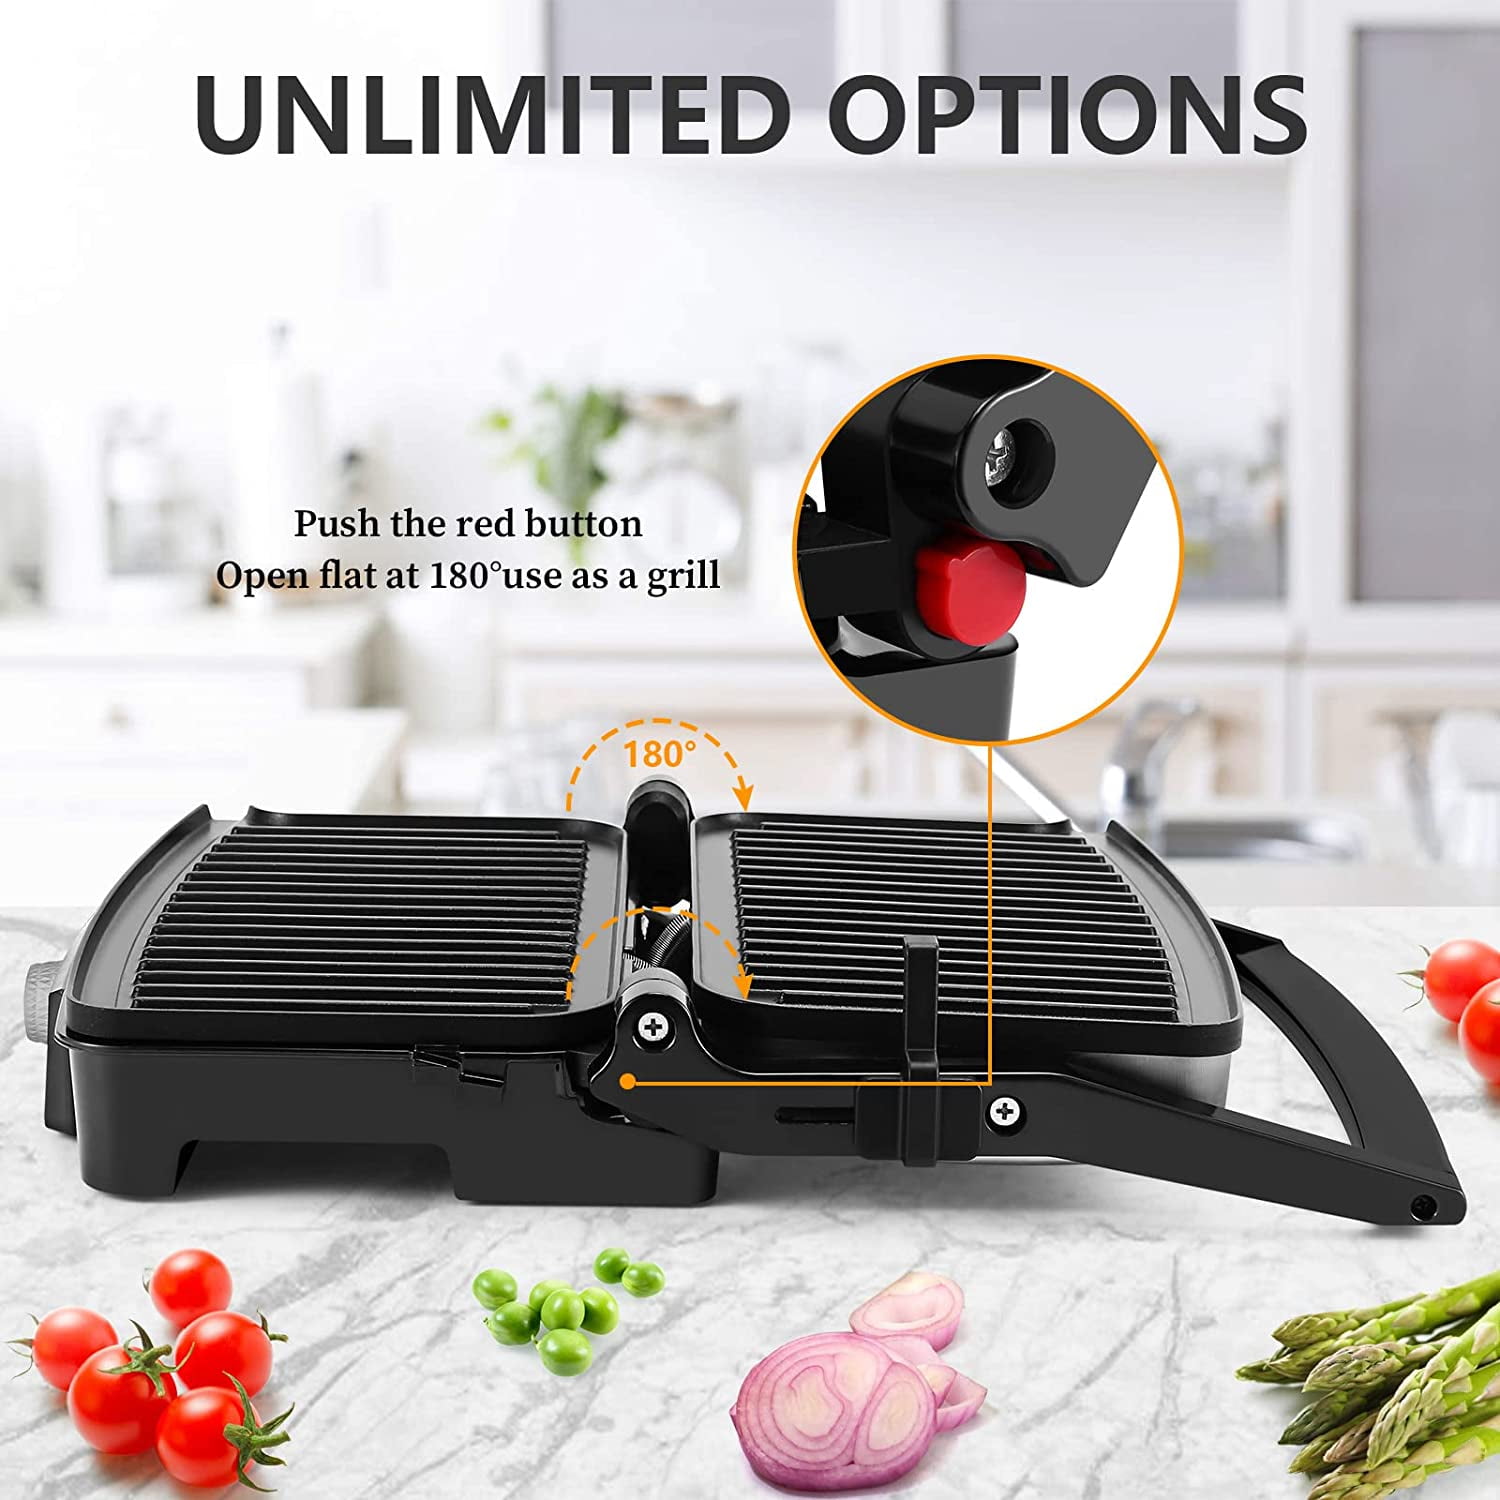 Monxook Electric Panini Press 750W Sandwich Press Non-Stick Coated Plates 846inx492in Panini Press Sandwich Maker with Indicator Lights Cool Touch Han